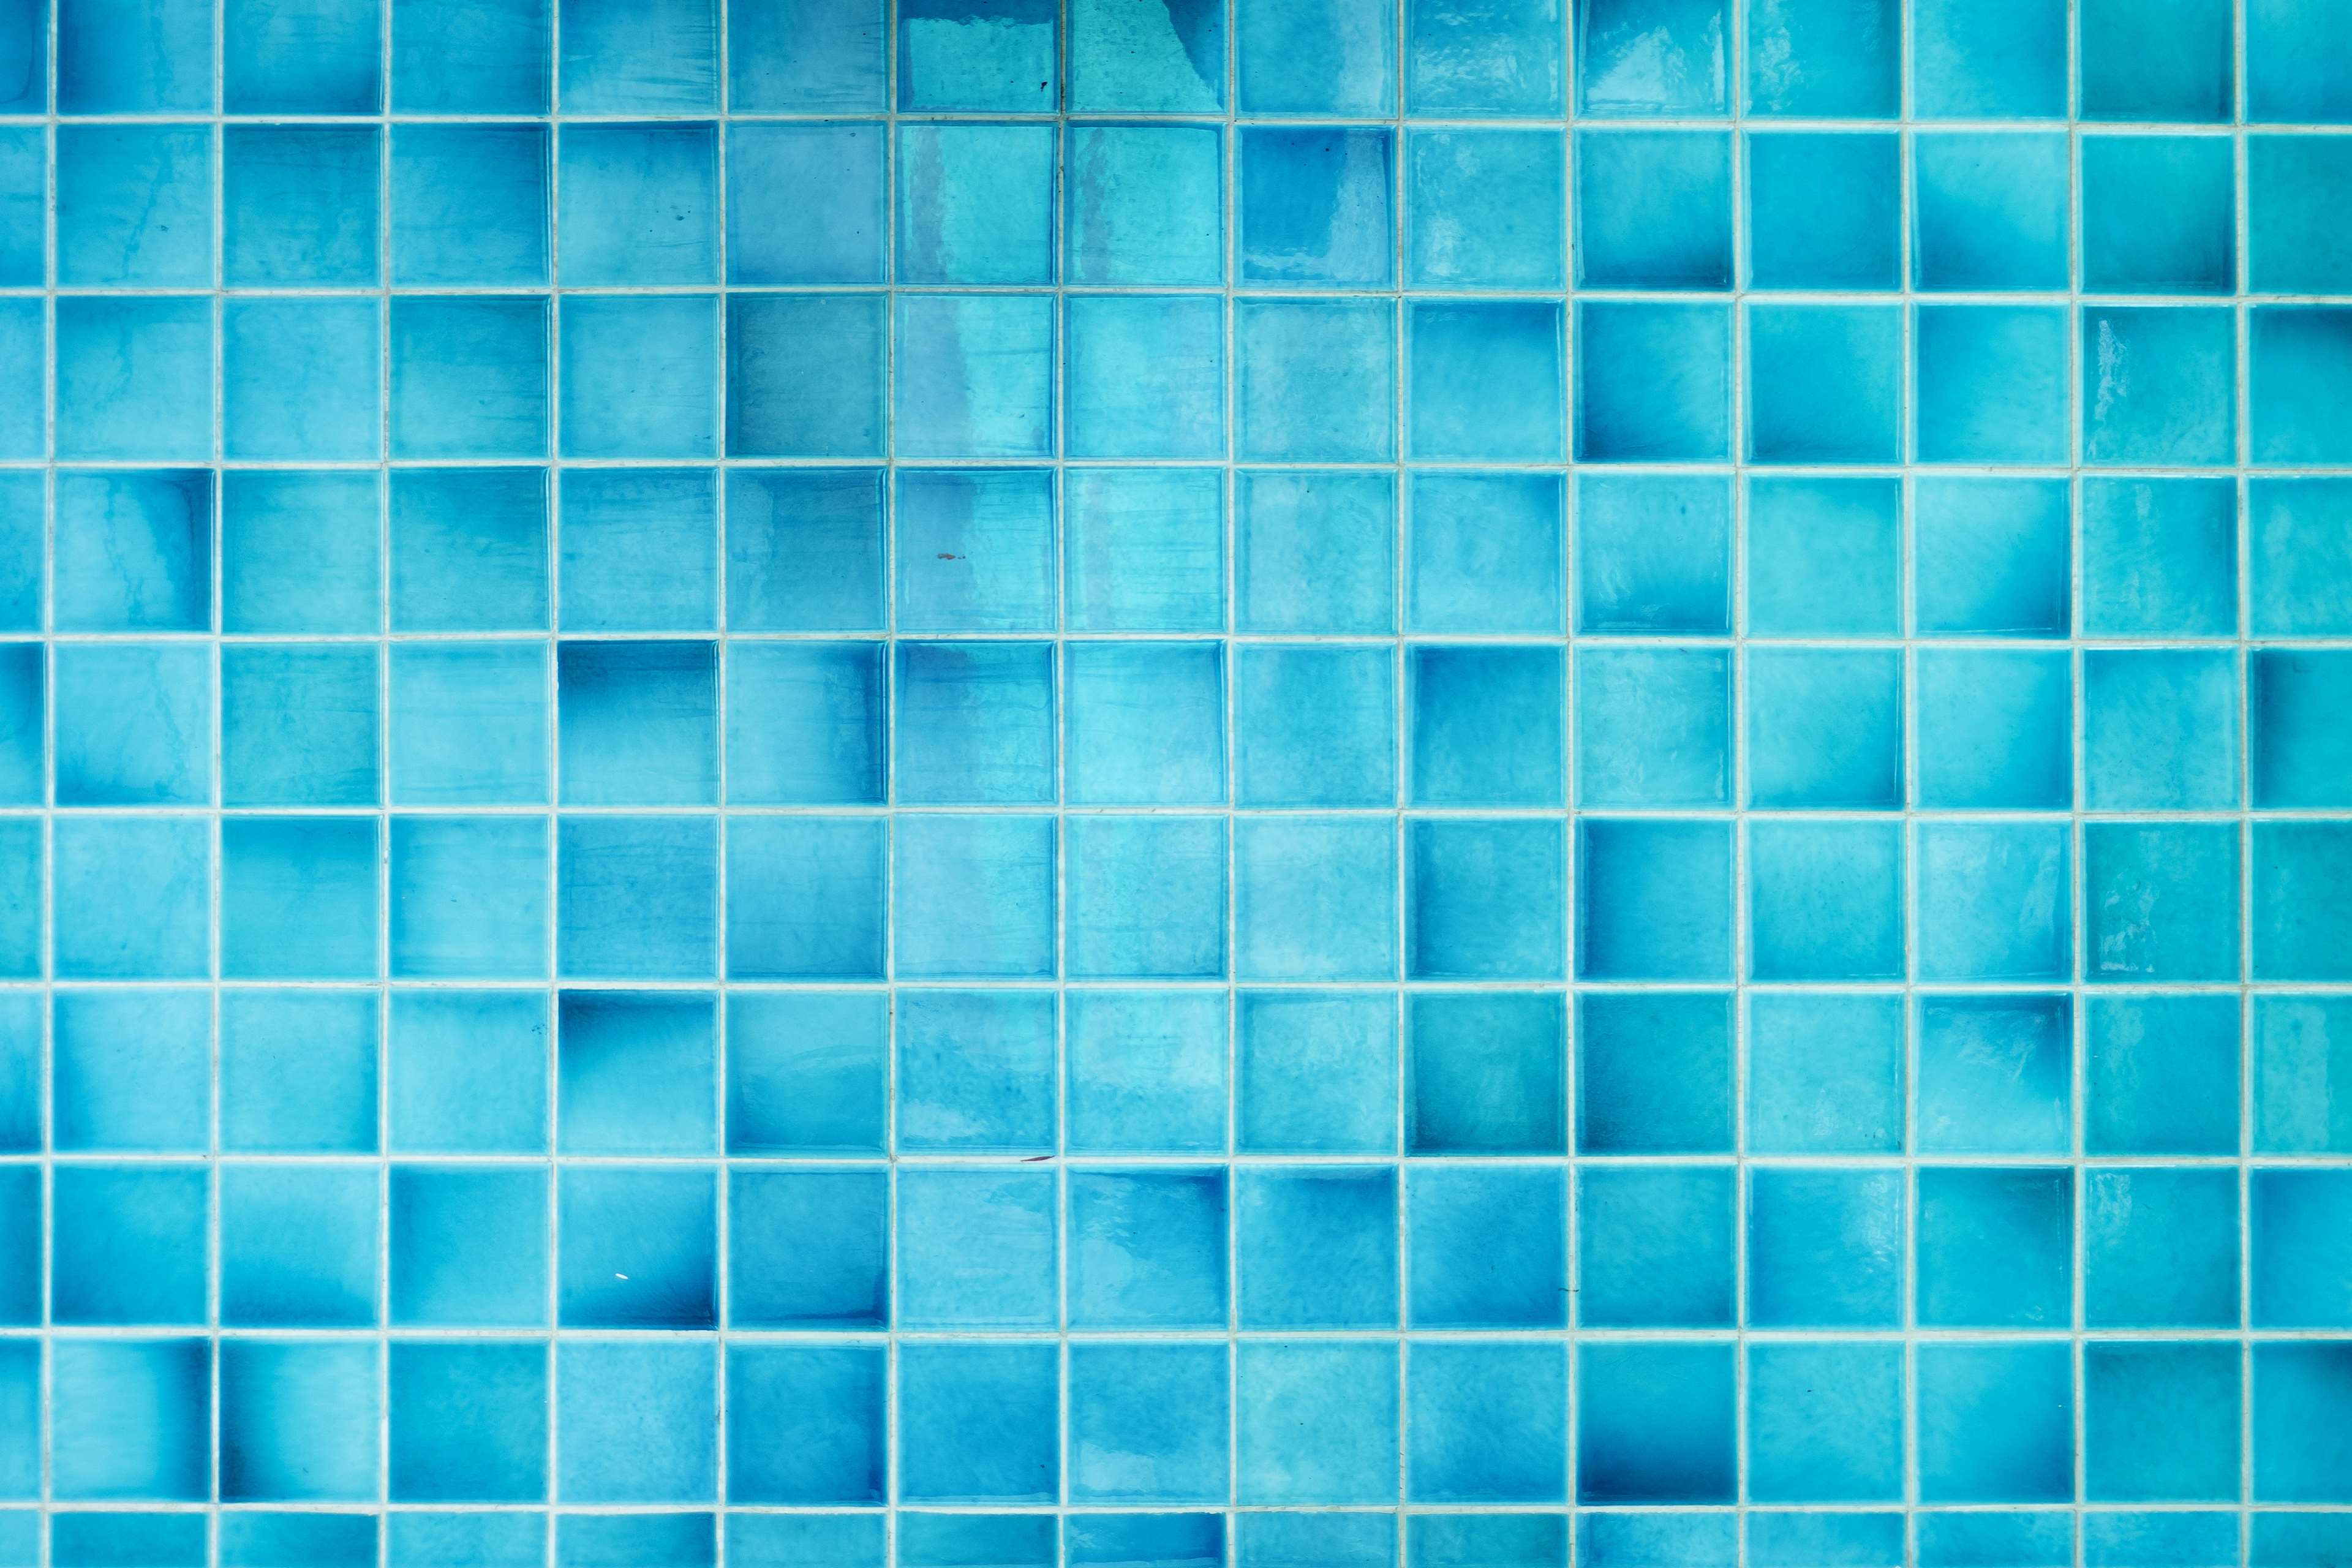 Abstract wallpapers background background image blue color mozaico pictures texture tiles wallpaper k